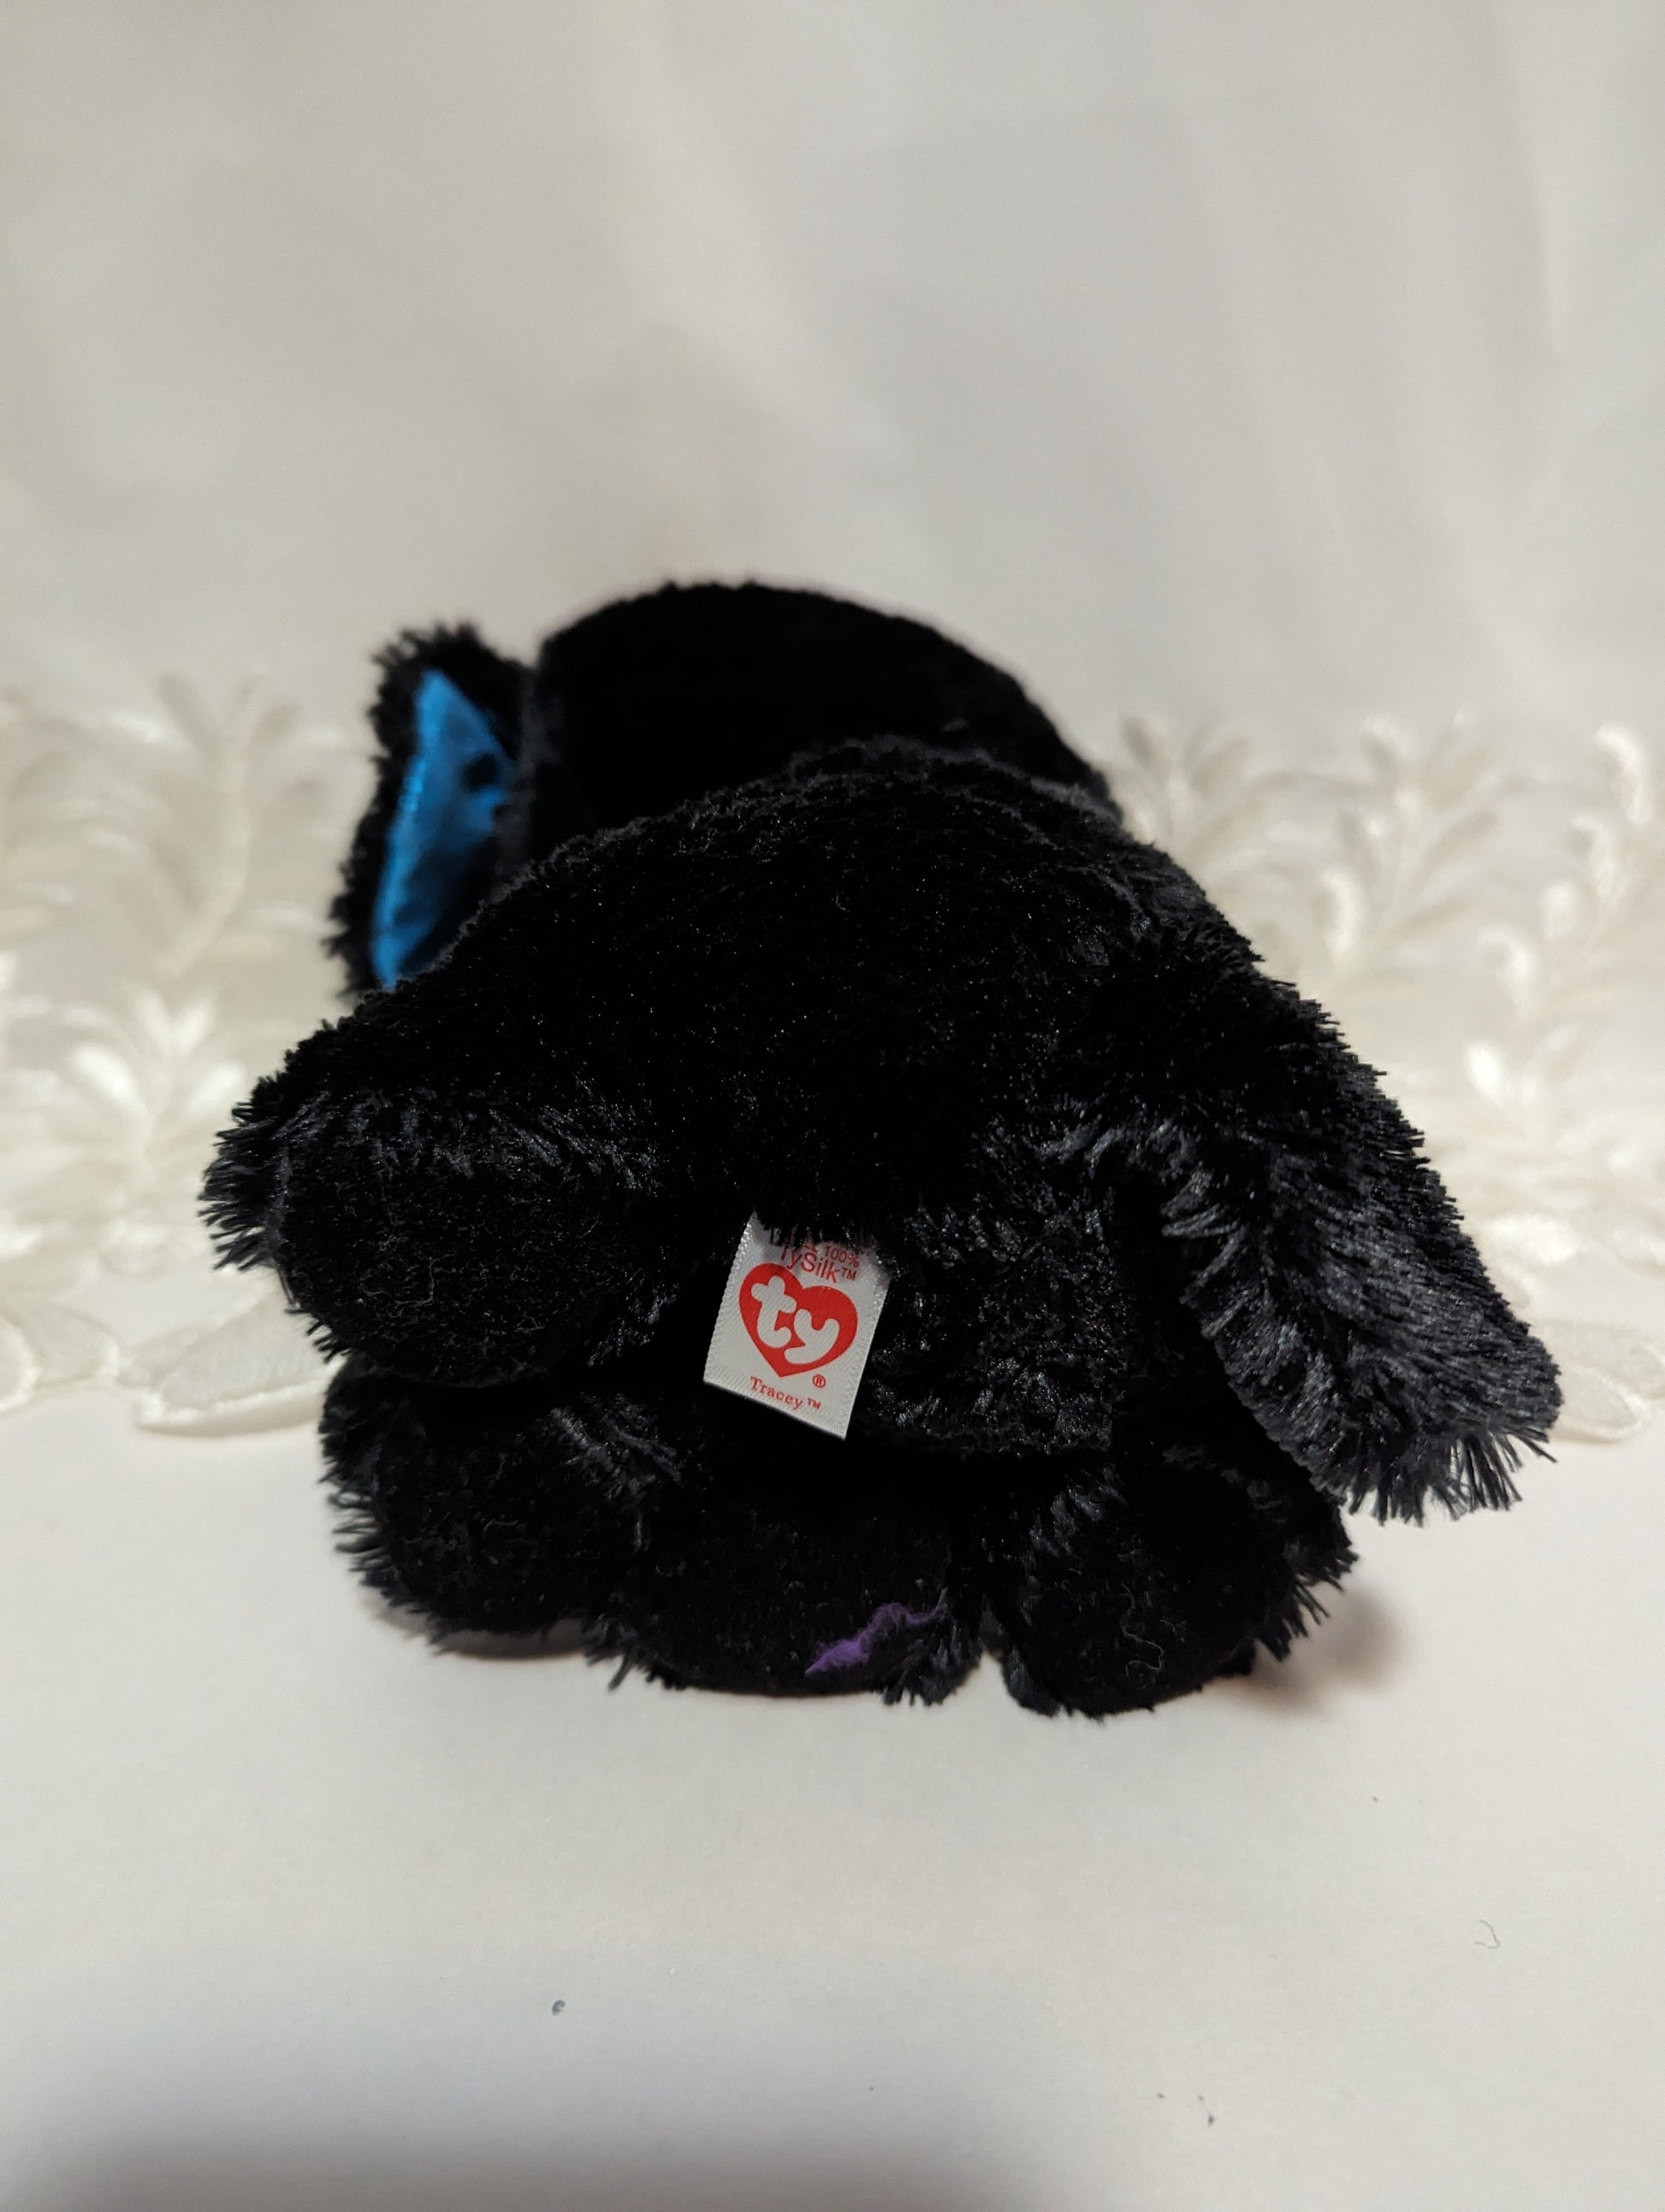 Ty Beanie Boo - Tracy the dog (9in) - Vintage Beanies Canada